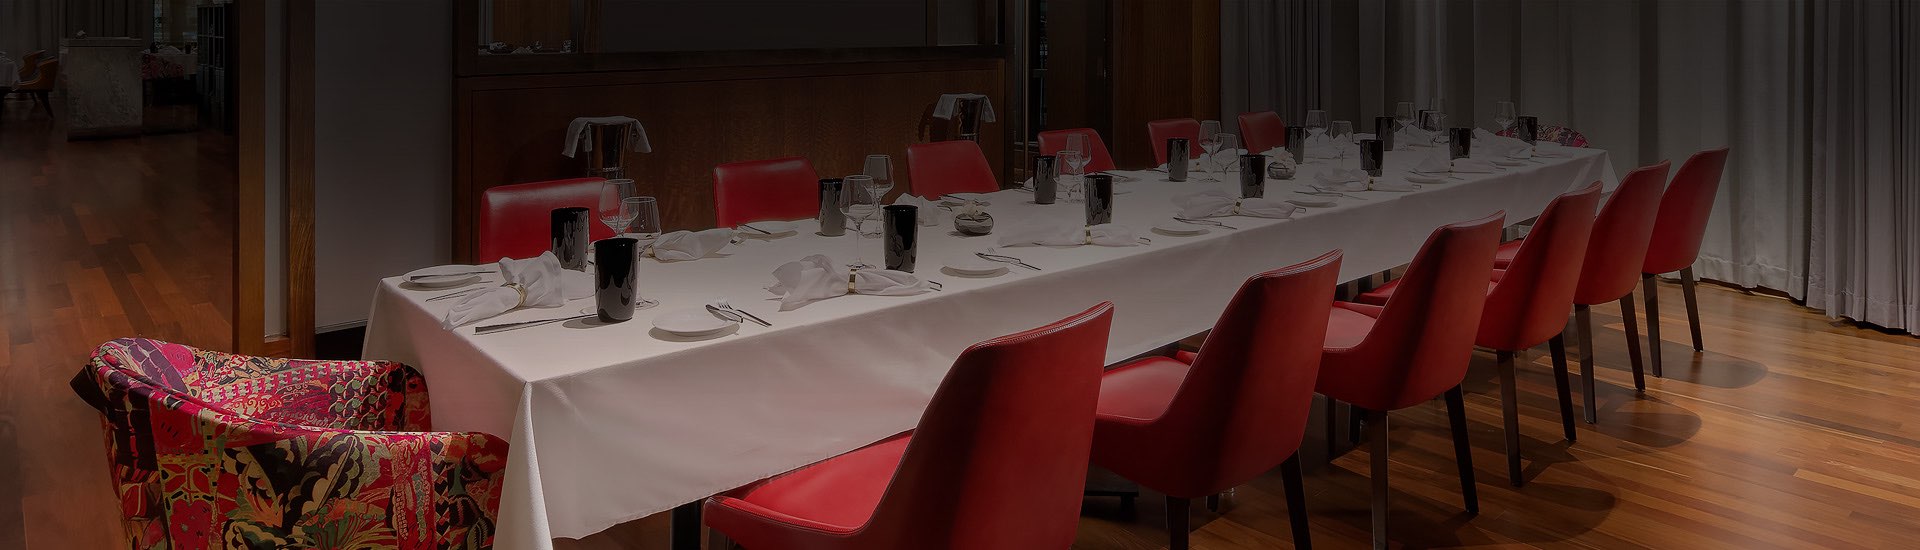 long table in a private dining room